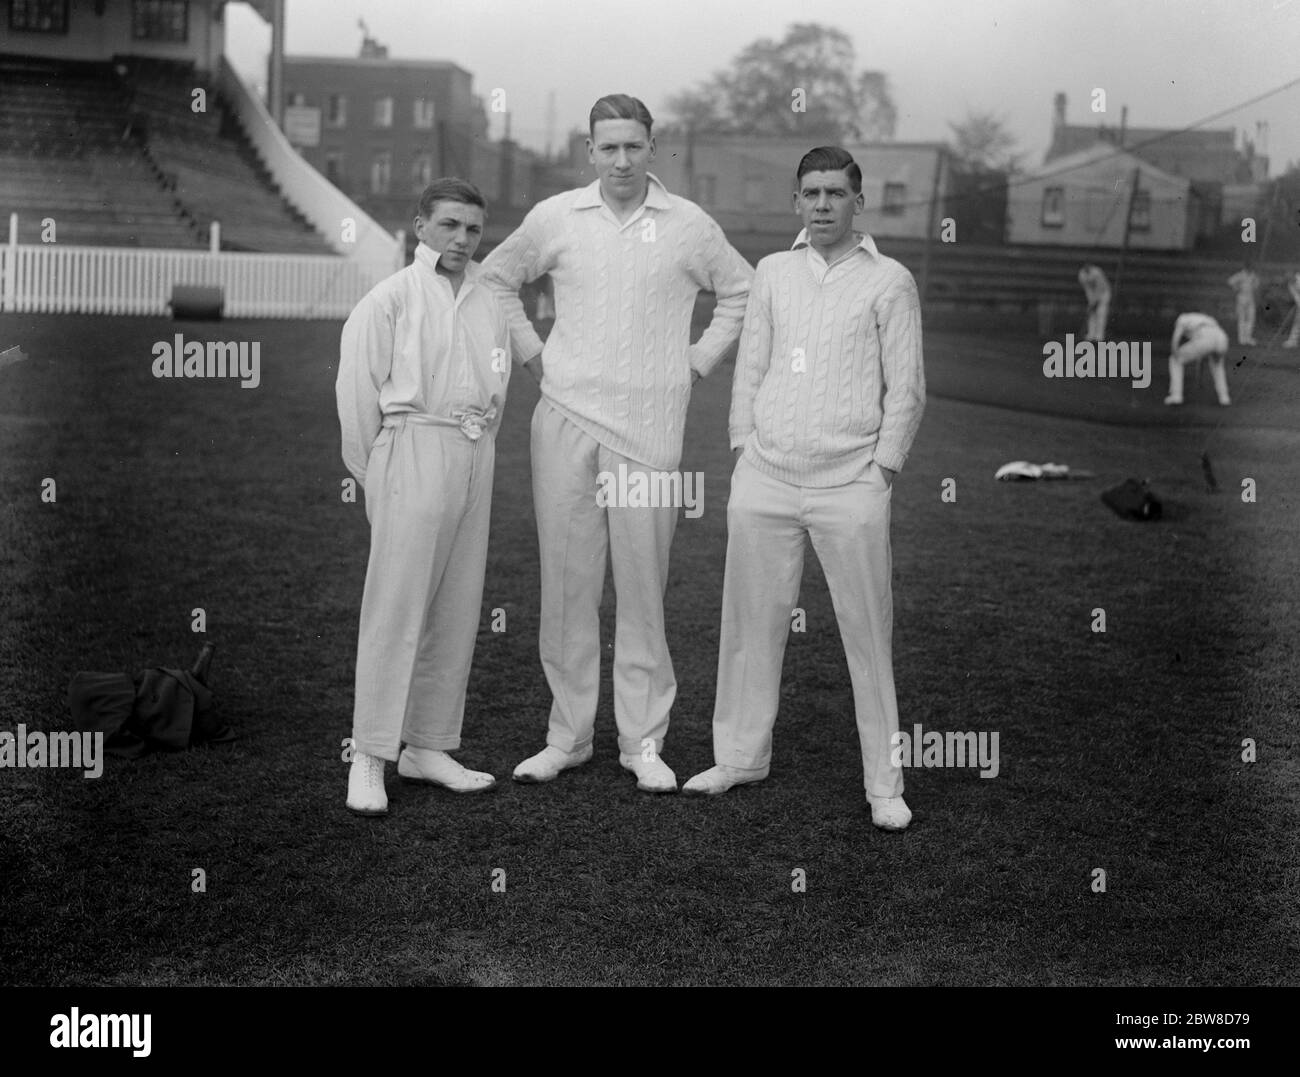 Surrey ' s new bowling trio . Surrey ' s search for new bowlers is beginning to produce results . left to right Hart , Alfred Richard (Alf) Gover , and Sheffield . 20 April 1928 Stock Photo